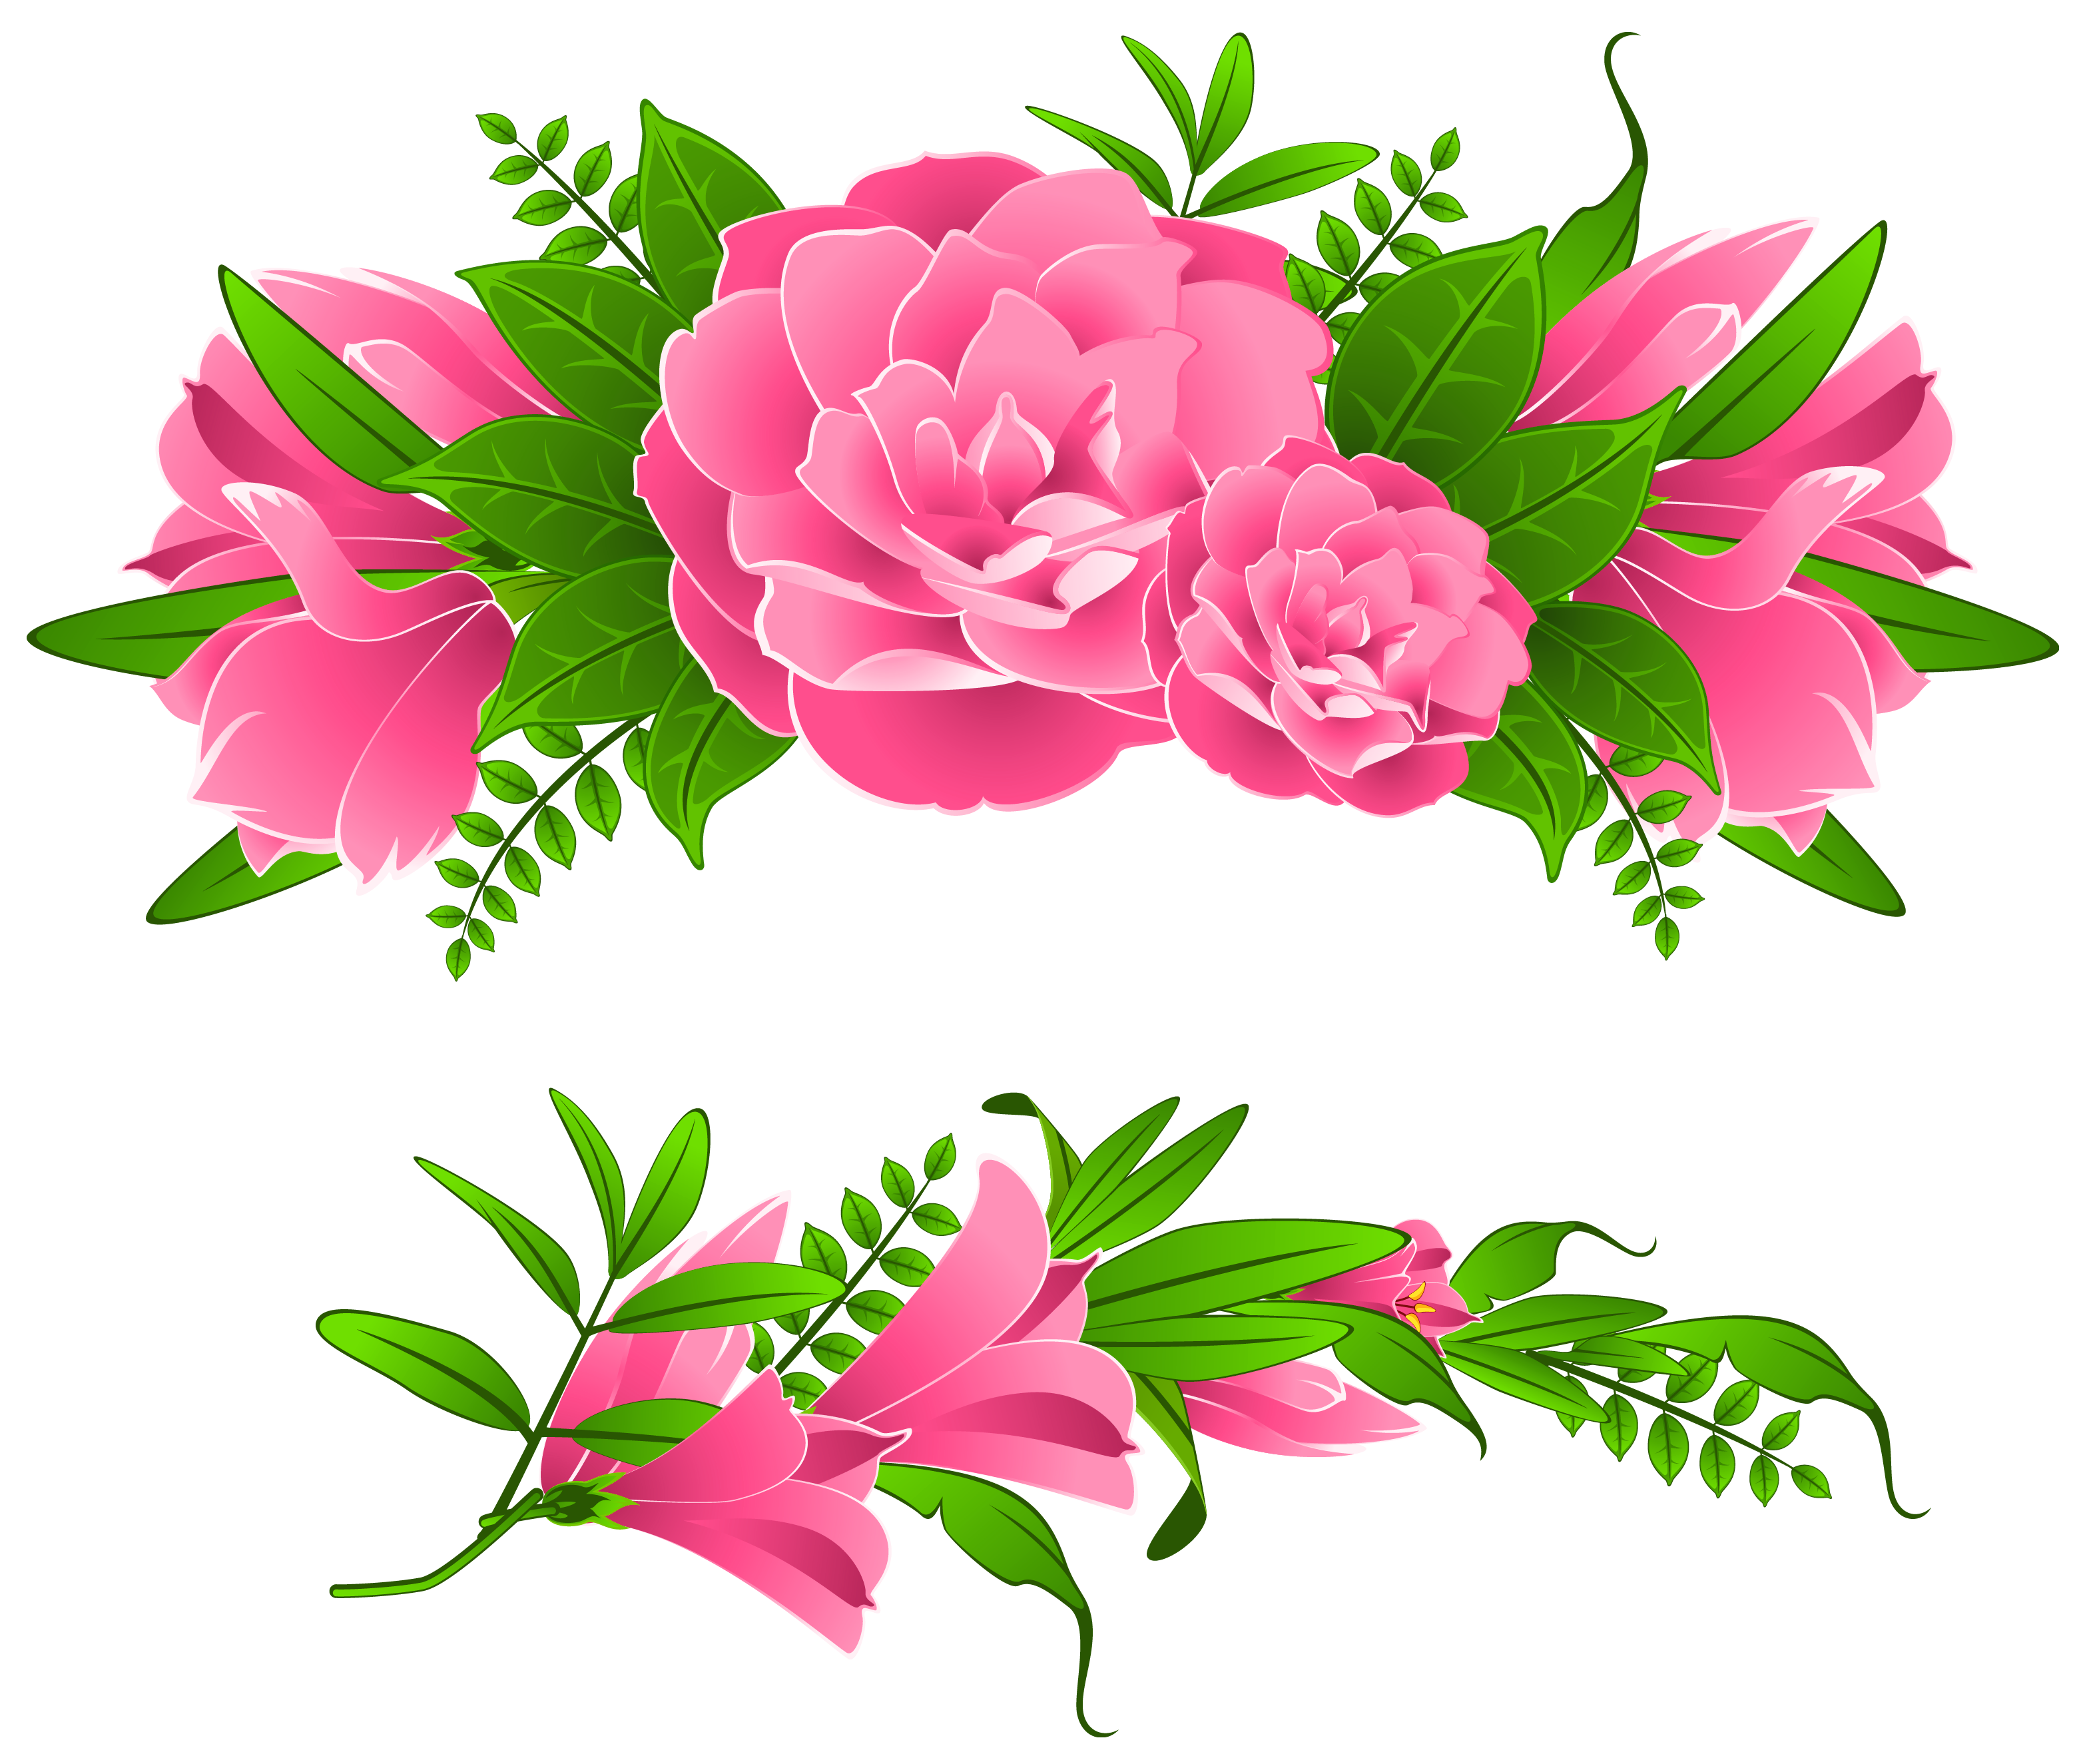 Flowers Borders PNG Transparent Images | PNG All